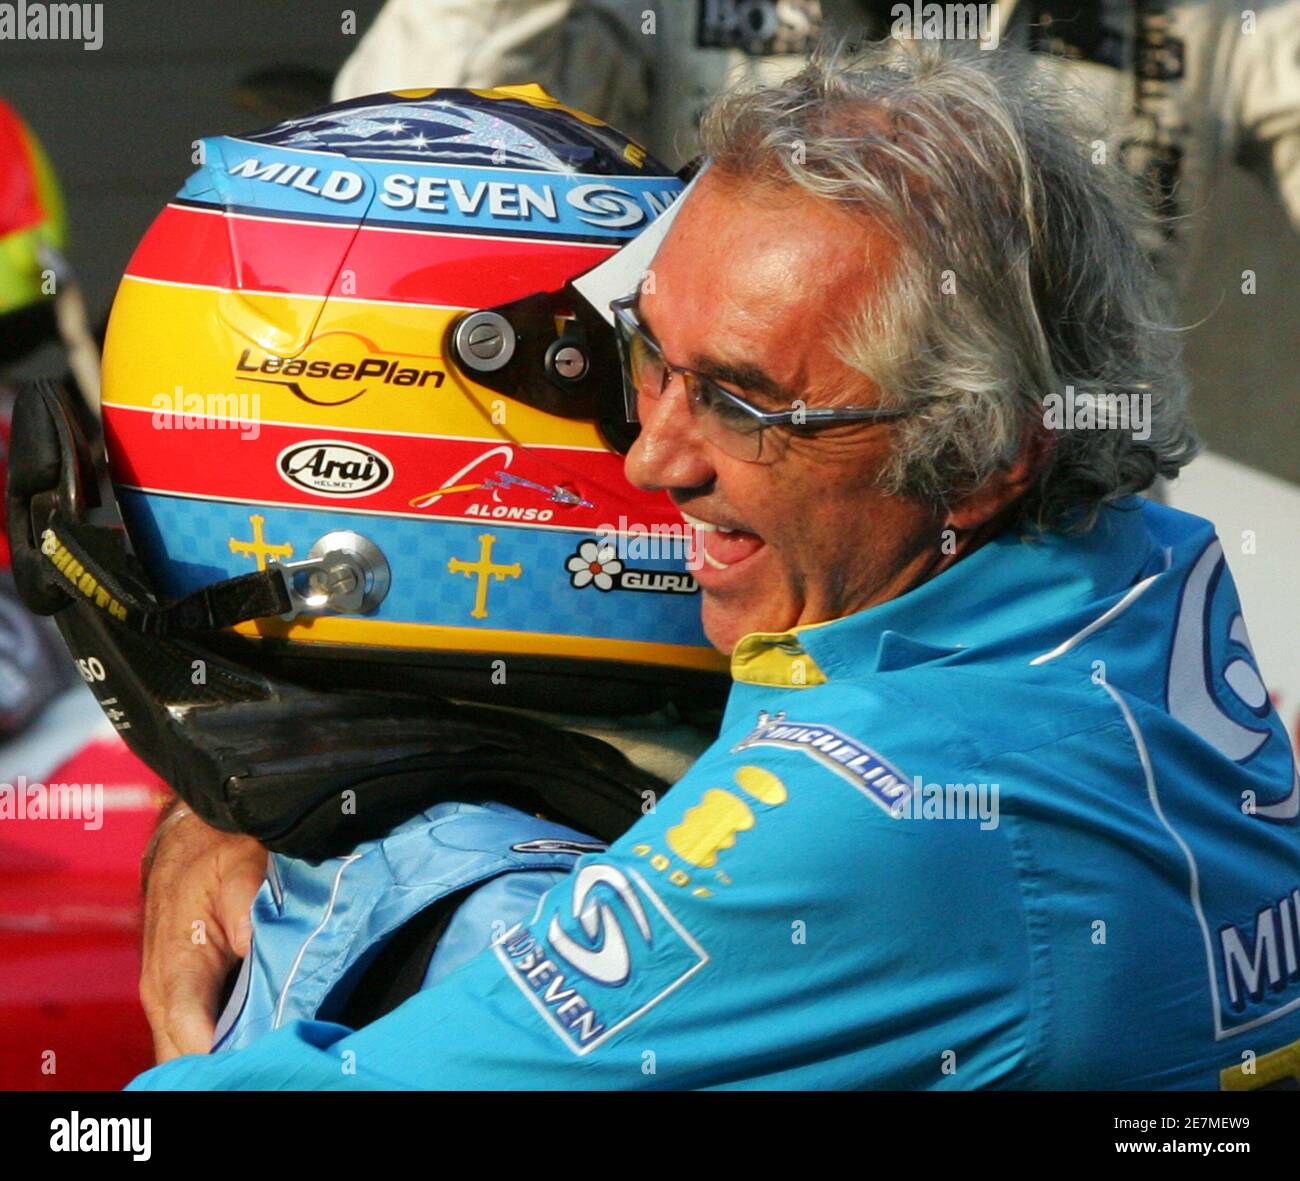 Renault's World Champion Formula One driver Fernando Alonso of Spain  celebrates with Renault F1 team Managing Director Flavio Briatore after  winning the season-ending Chinese Grand Prix in Shanghai October 16, 2005.  Alonso